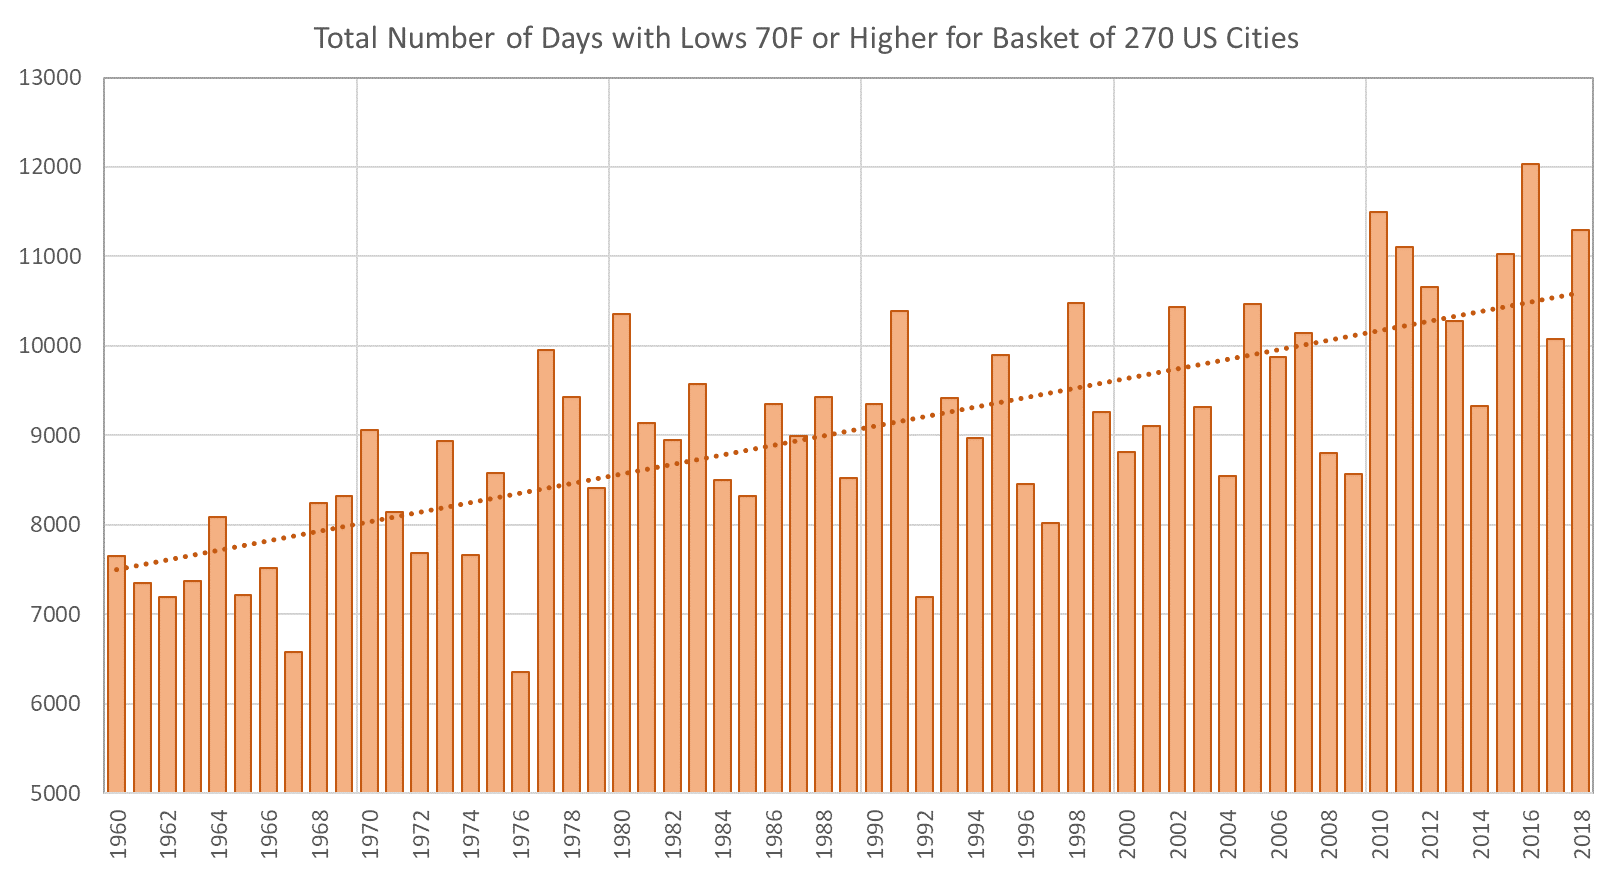 Total Number of Days with Lows 70F or Higher